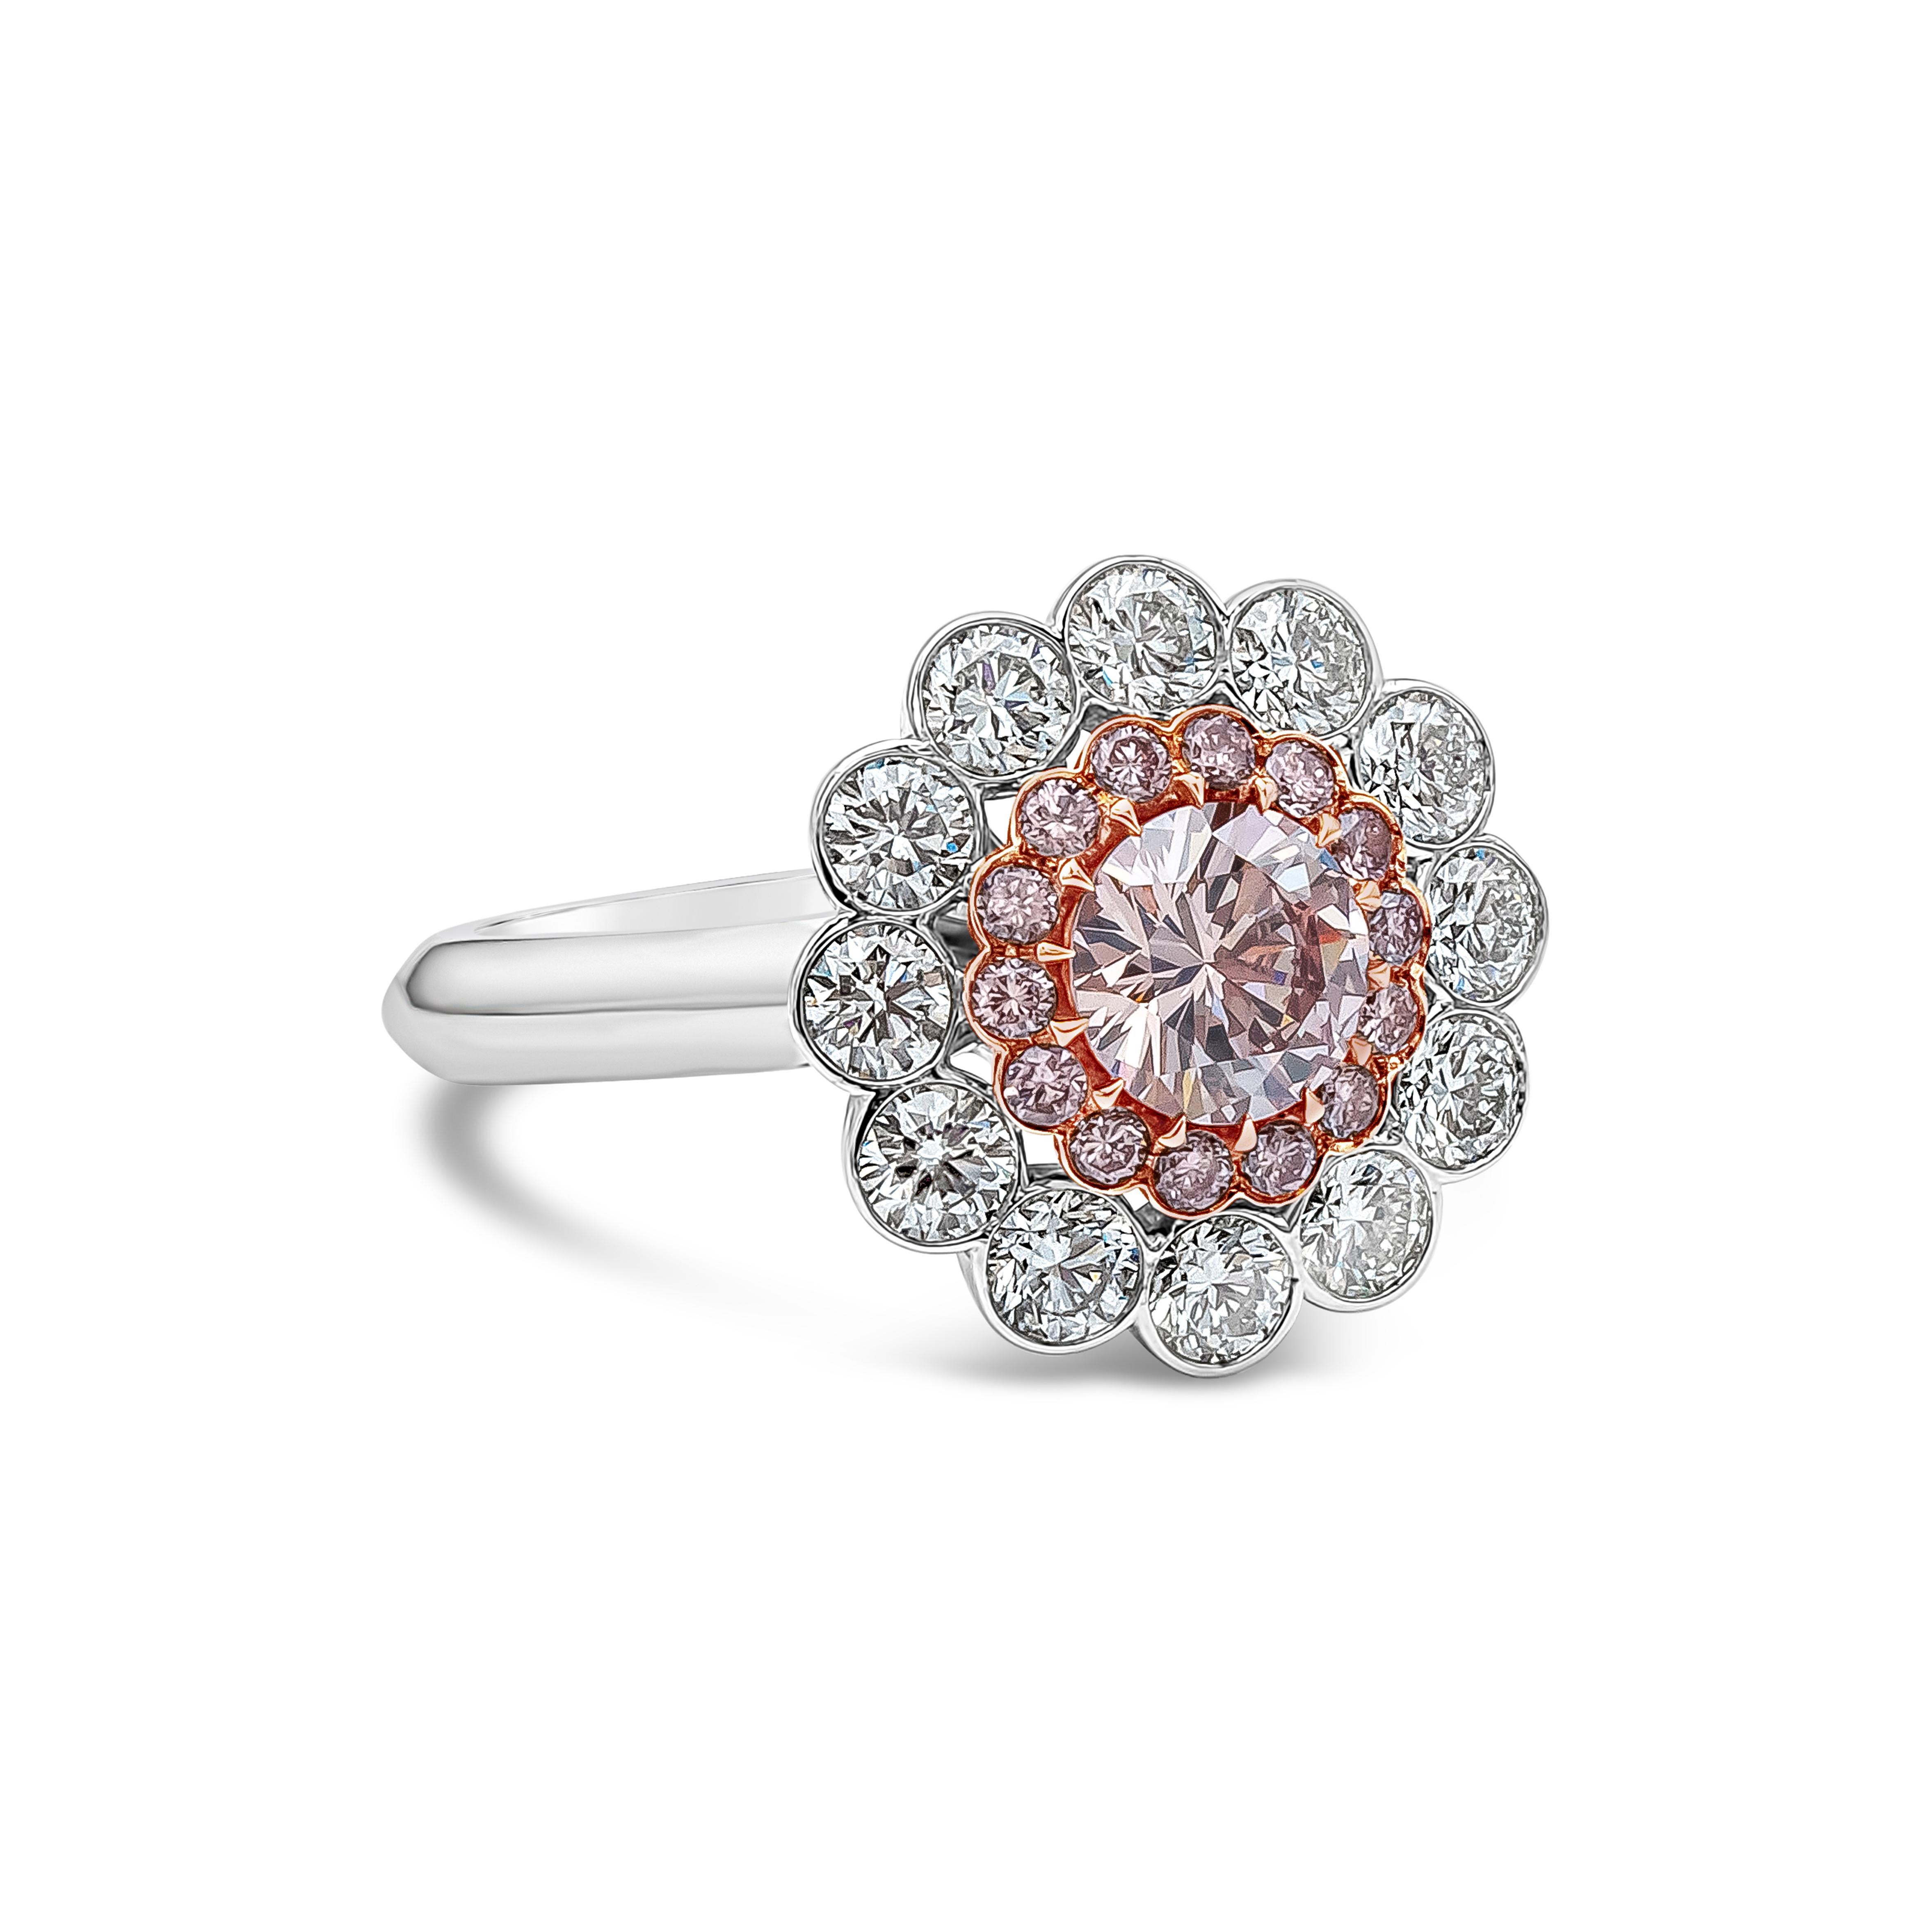 Rare and stylish piece of high end jewelry showcasing a vibrant 0.77 carat brilliant round pink diamond certified by GIA as natural fancy pink, SI1 clarity. Set in a fourteen prong 18k rose gold basket surrounded by row of 14 pink round diamonds on